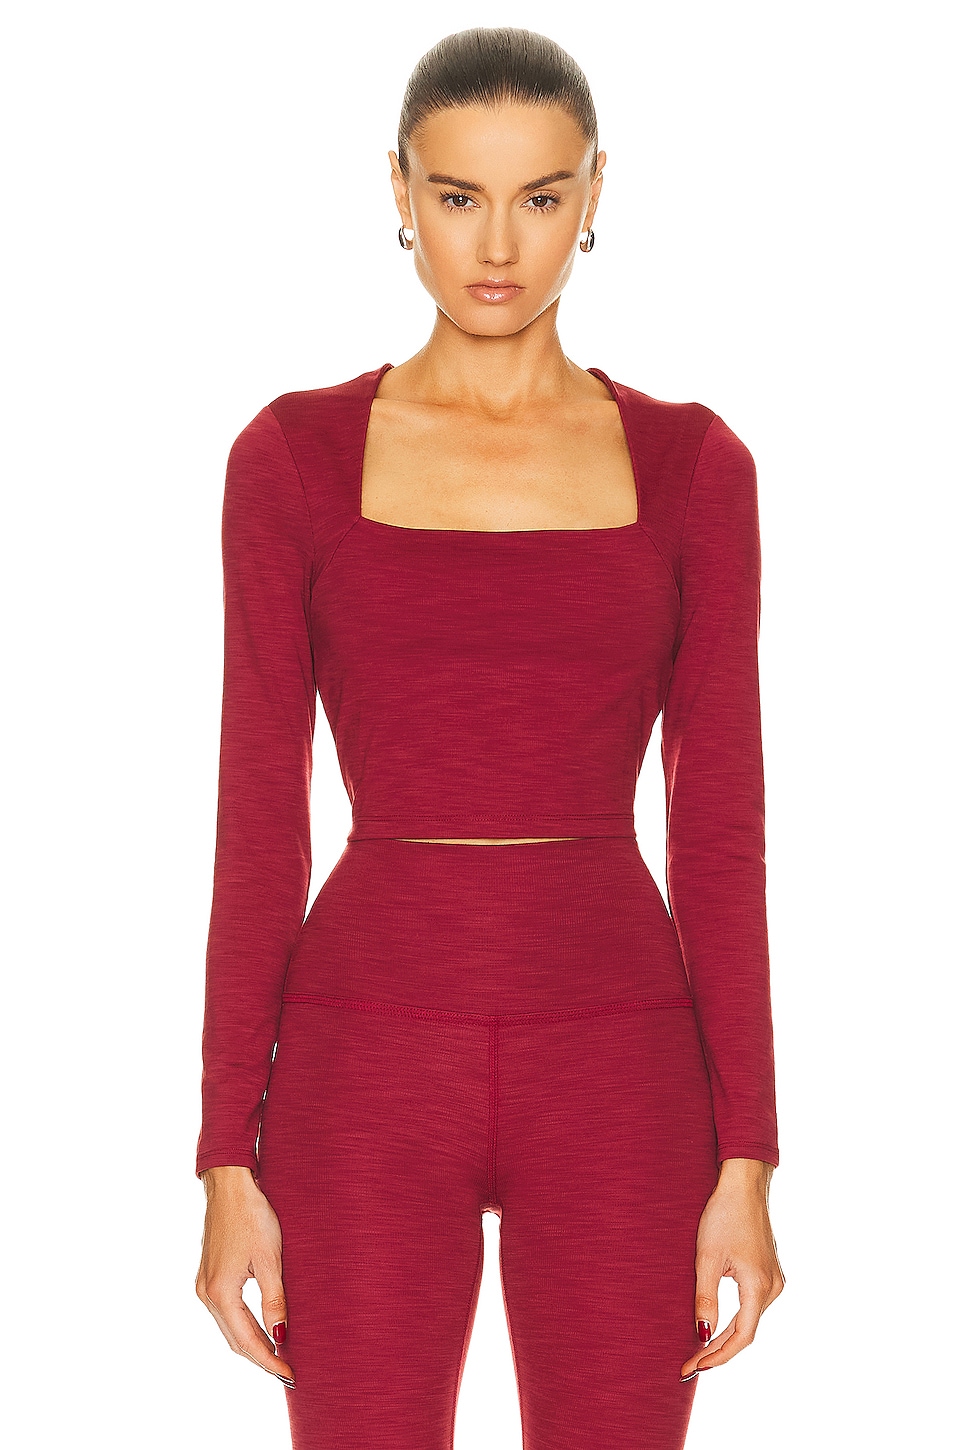 Beyond Yoga Heather Rib Frame Cropped Pullover Top in Rose